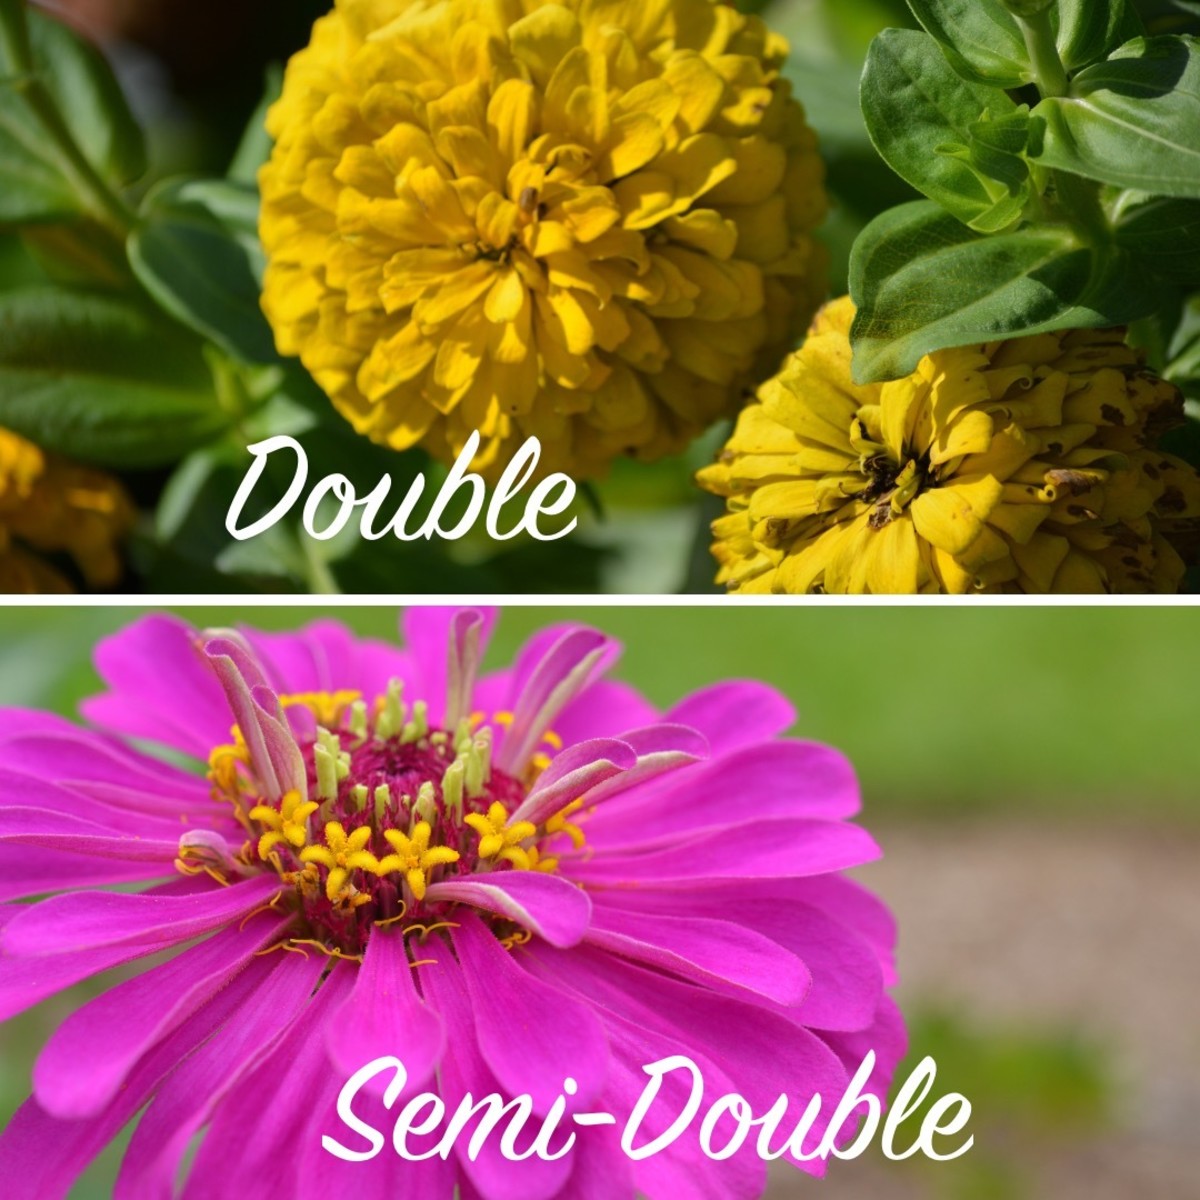 It’s easy to see why the pollinators prefer the semi-double and single flowers over the double ones.